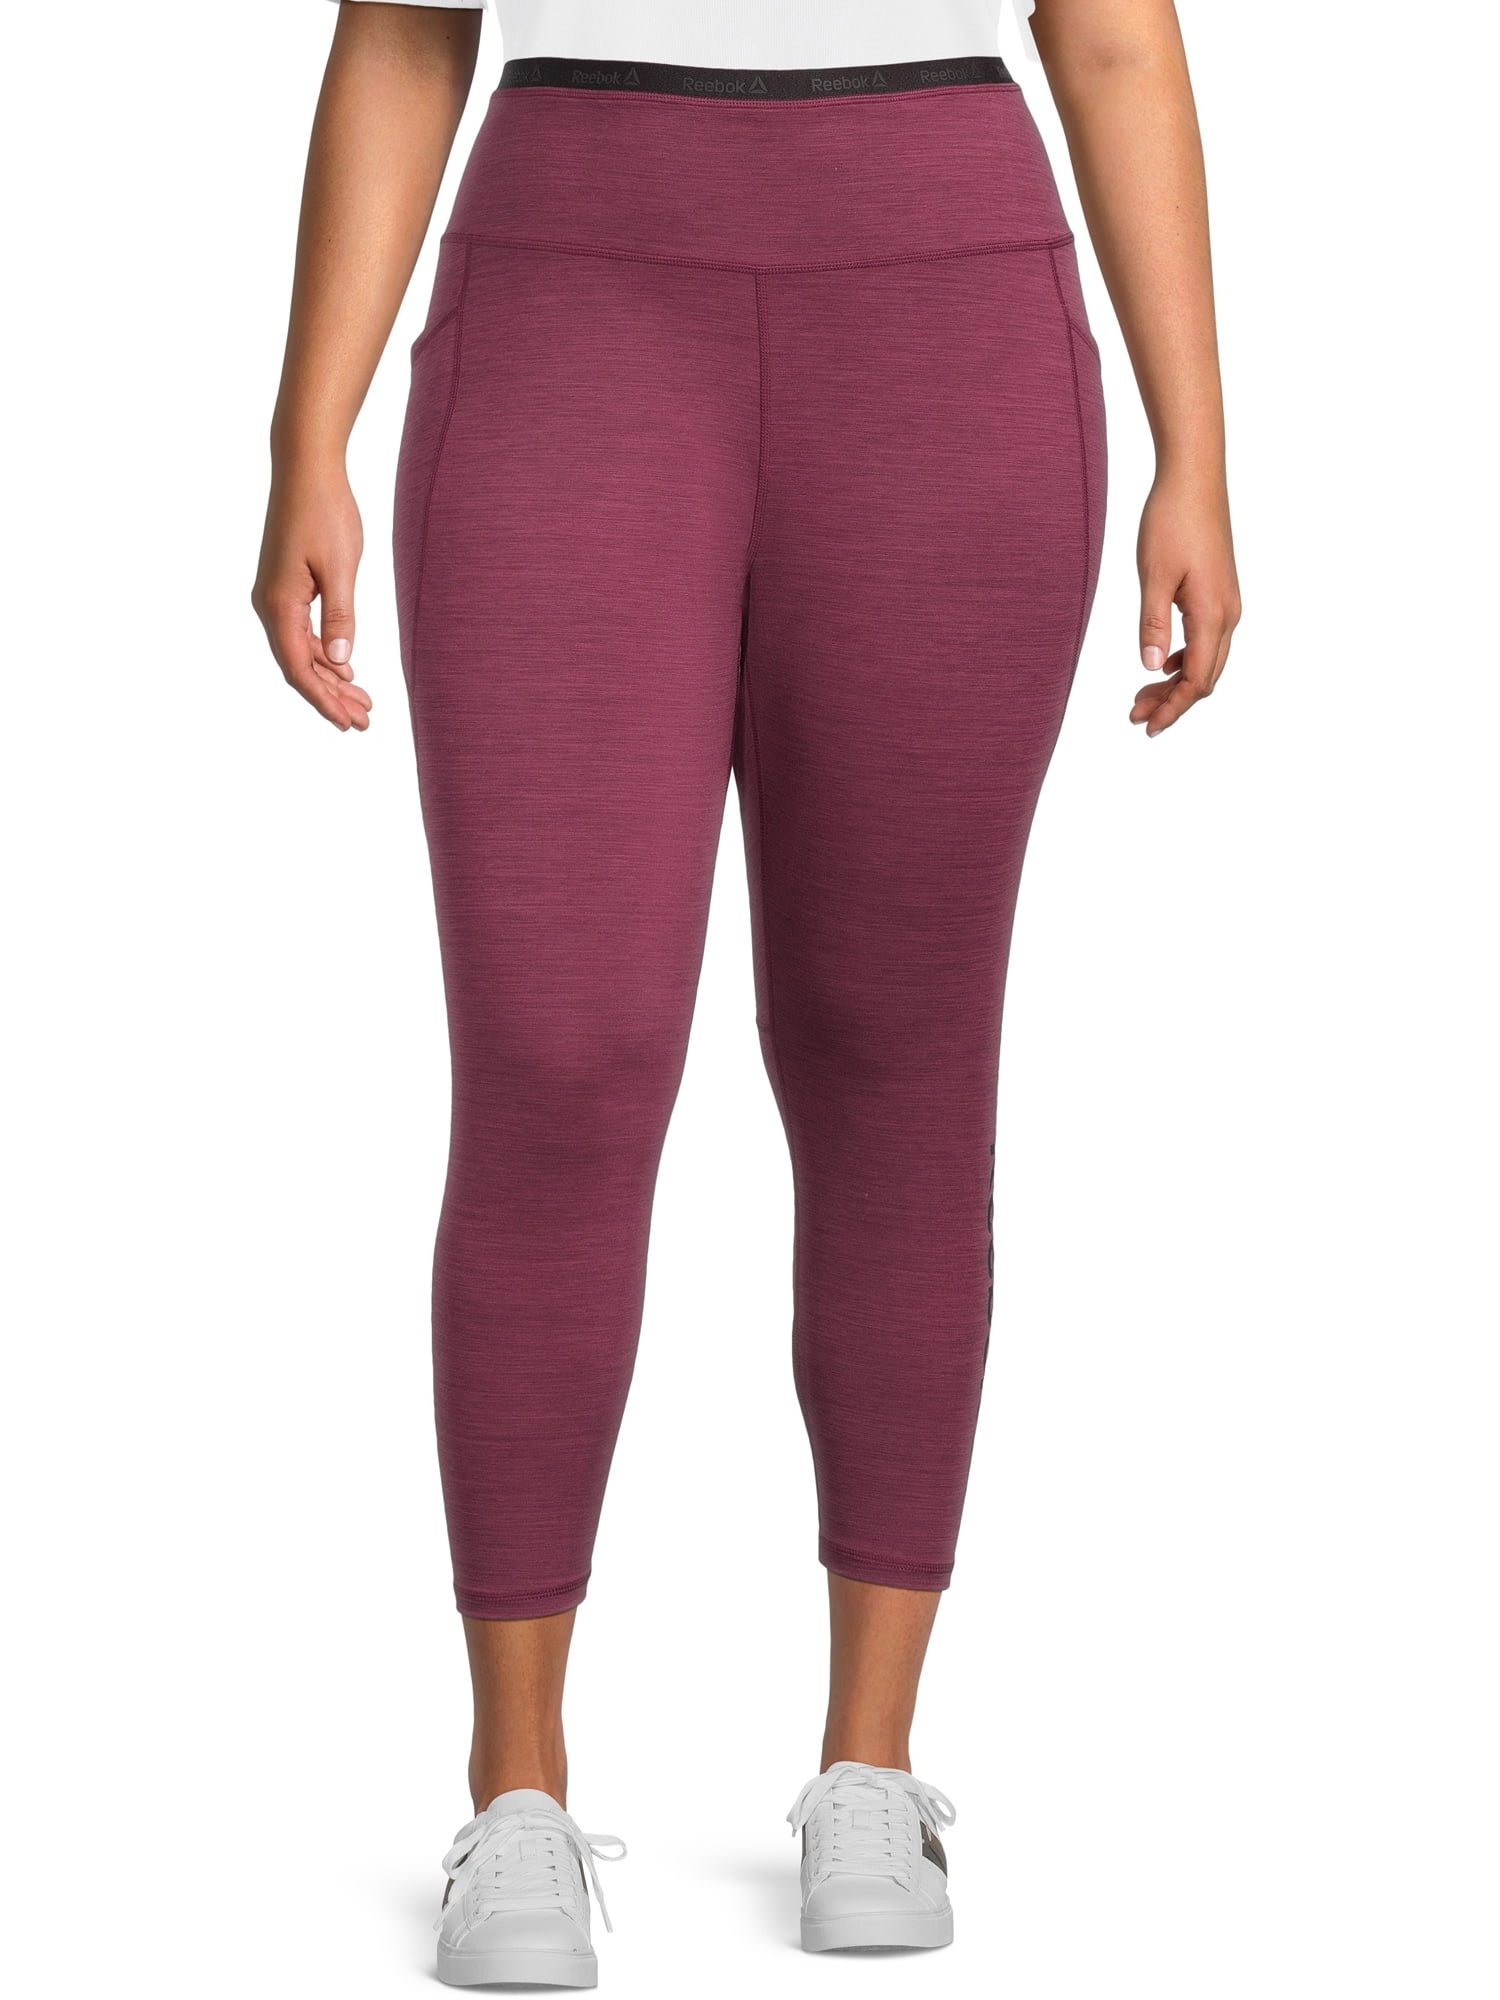 ROCK & ROMANCE - COTTON CANDY - HIGH RISE LEGGINGS — FOR THE LOVE